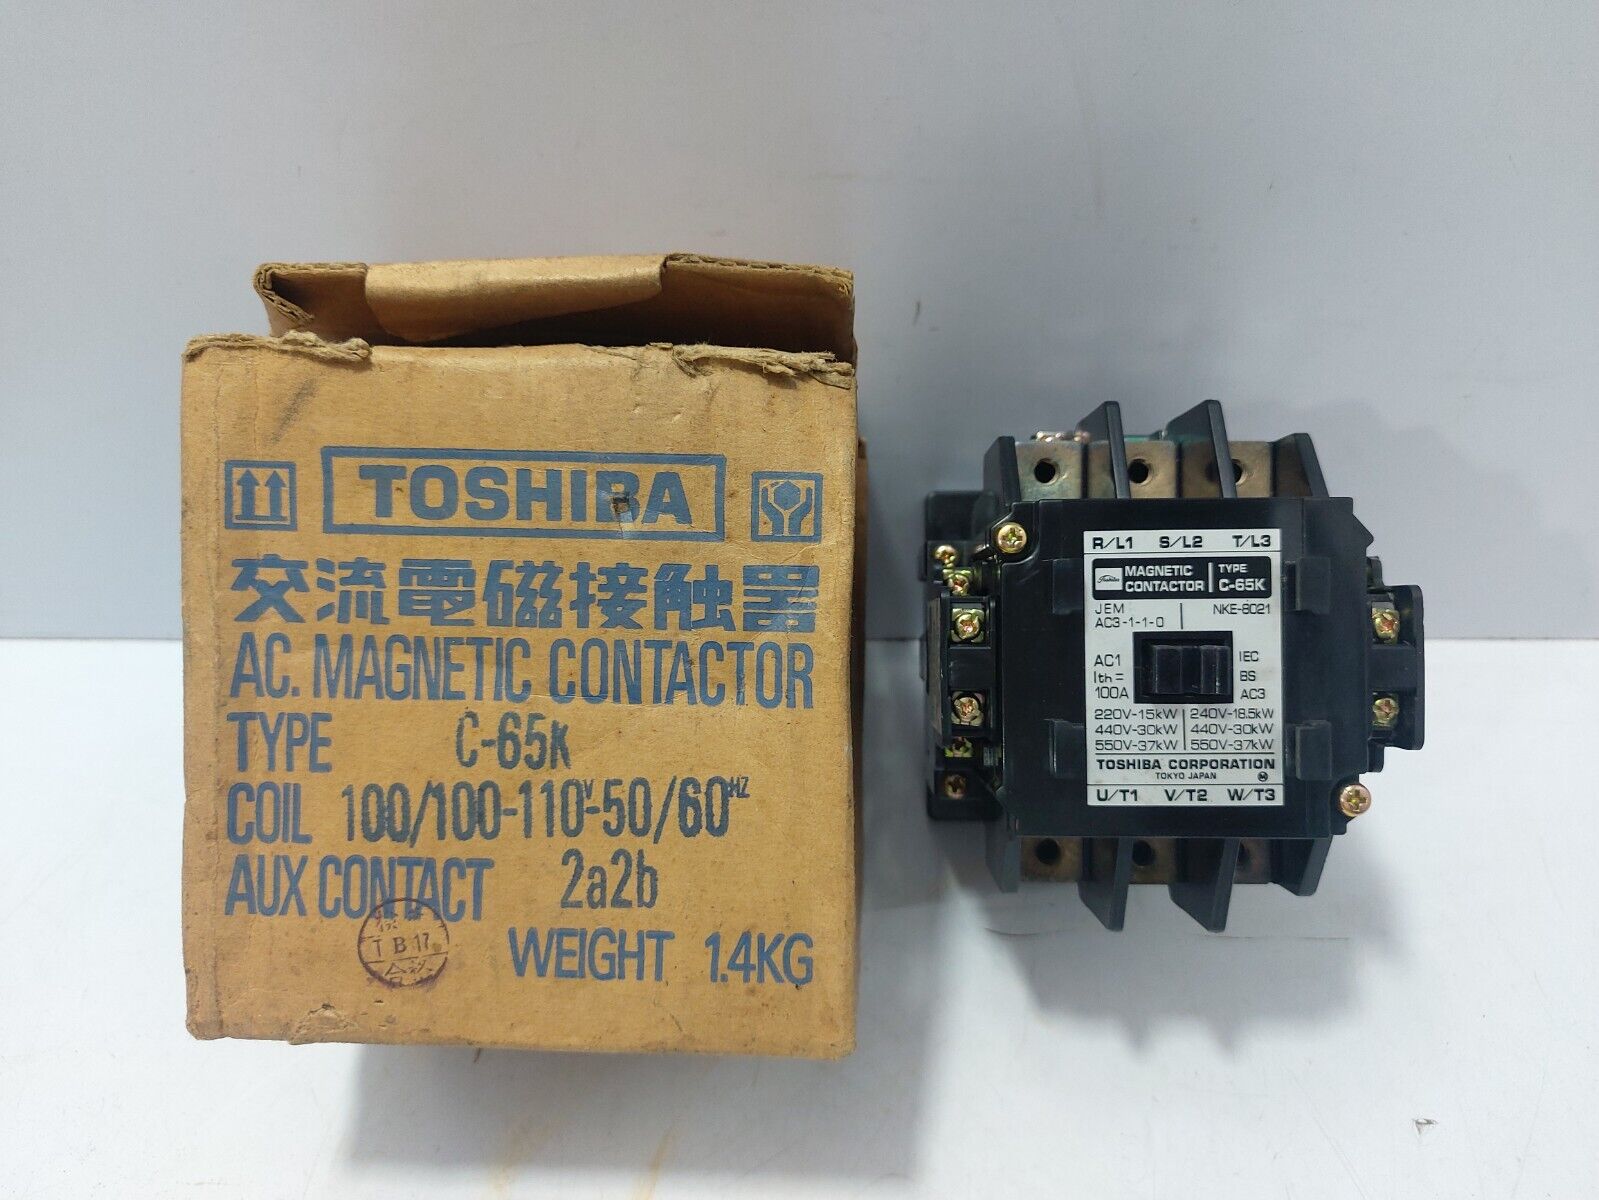 Toshiba C-65K Magnetic Contactor, Coil 100/100-110V 50/60Hz